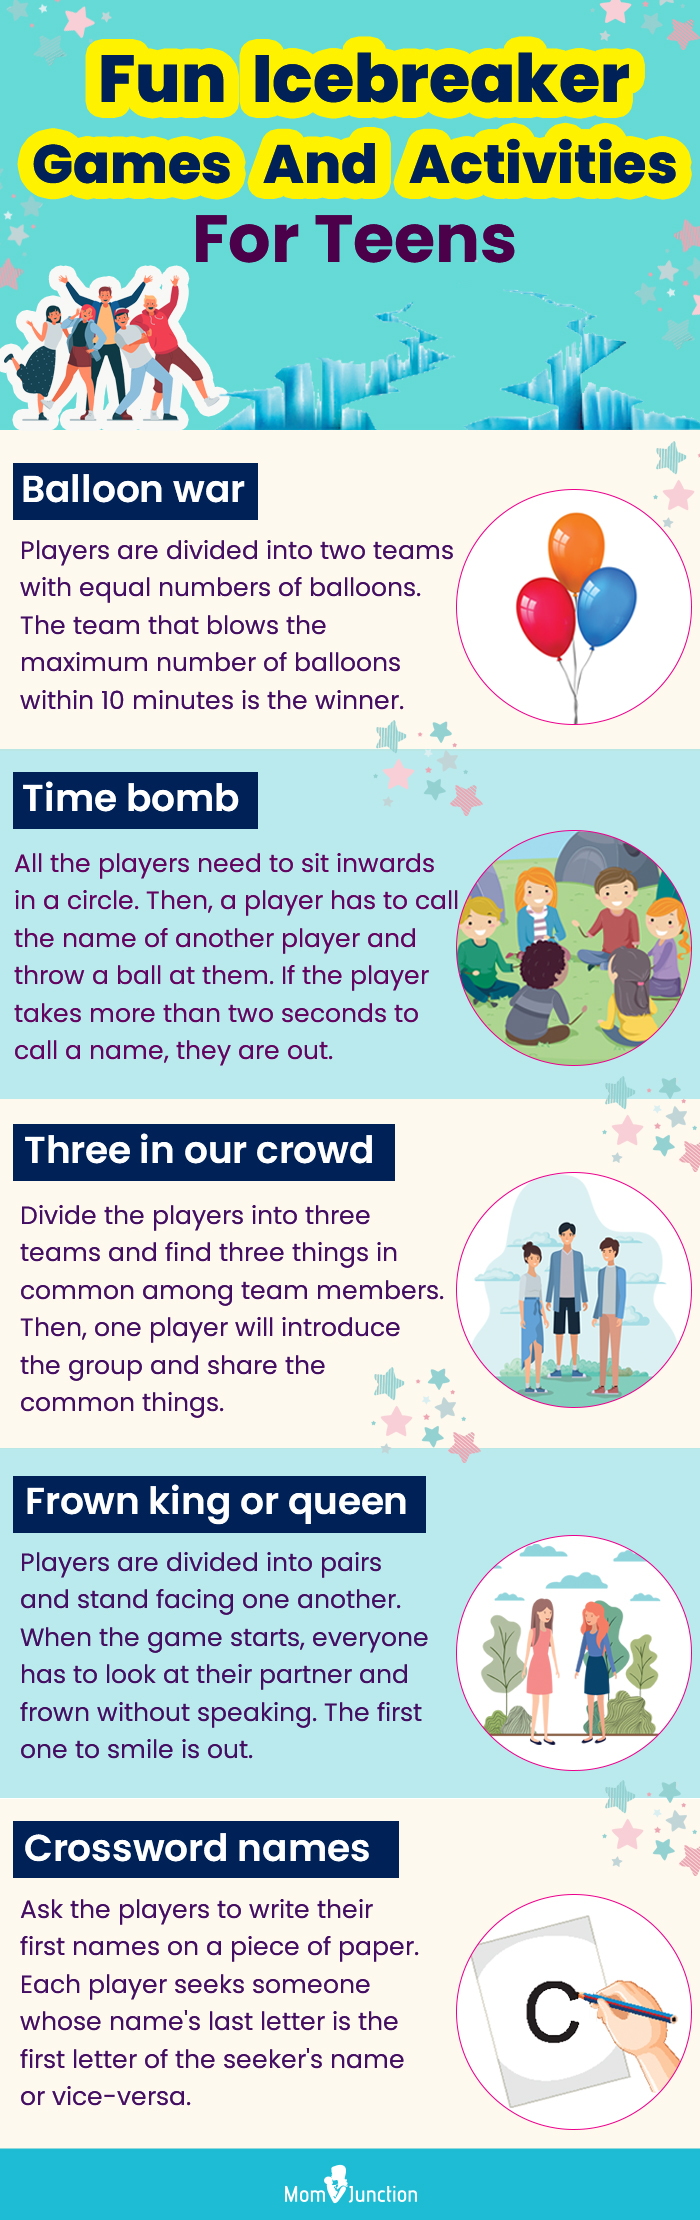 fun icebreaker games and activites for teens [infographic]